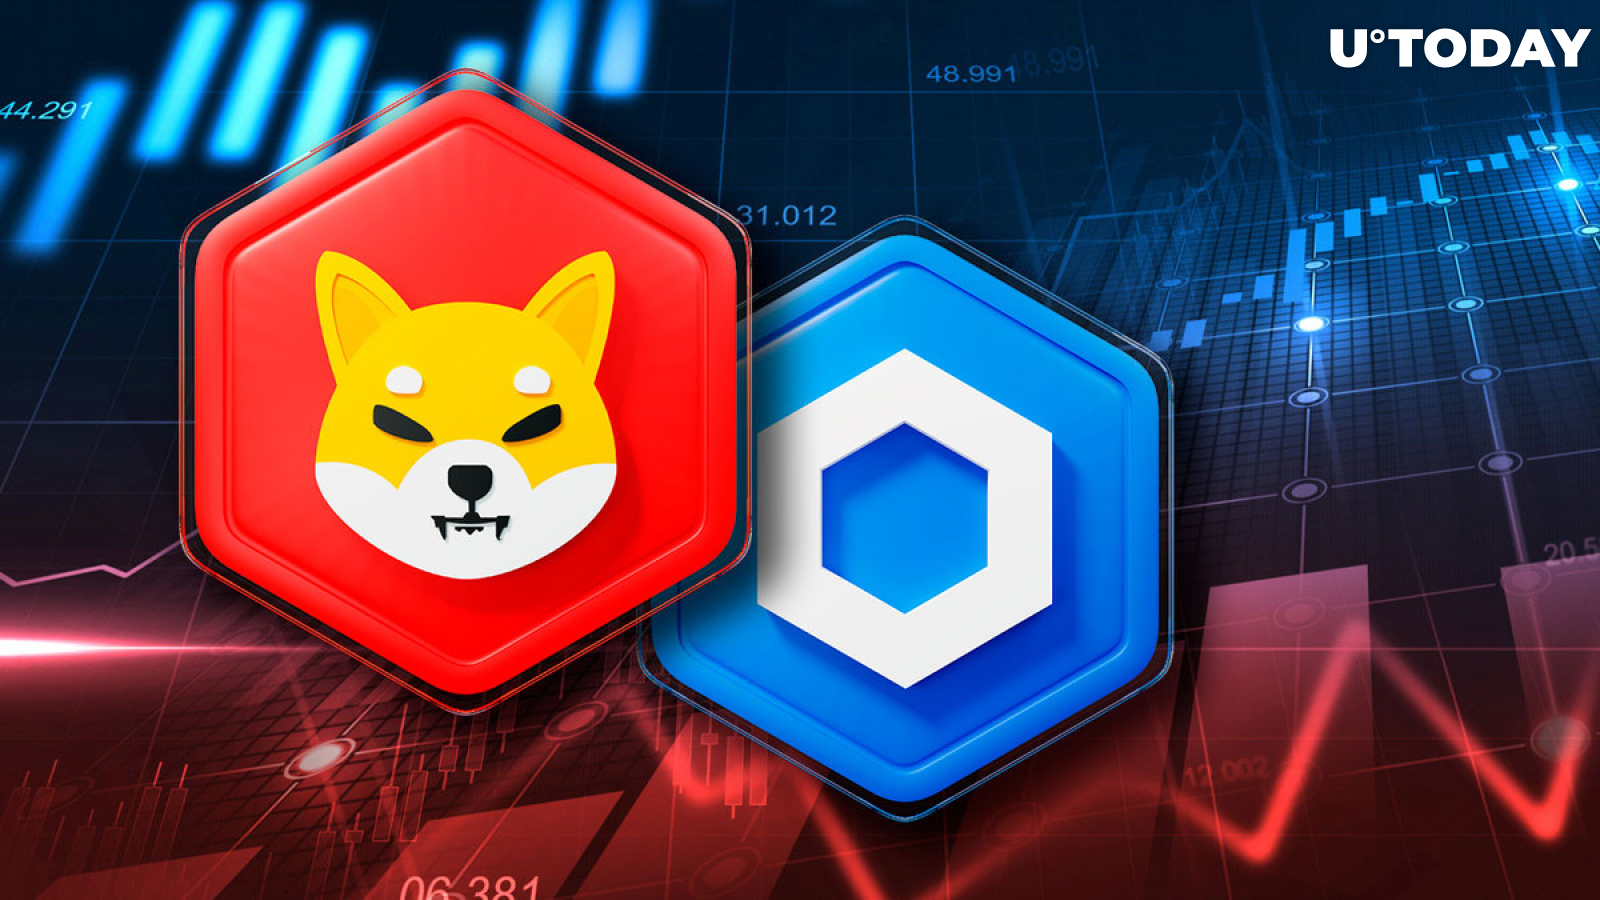 Shiba Inu (SHIB) Loses Place in Ranking With Chainlink, Possible Reasons